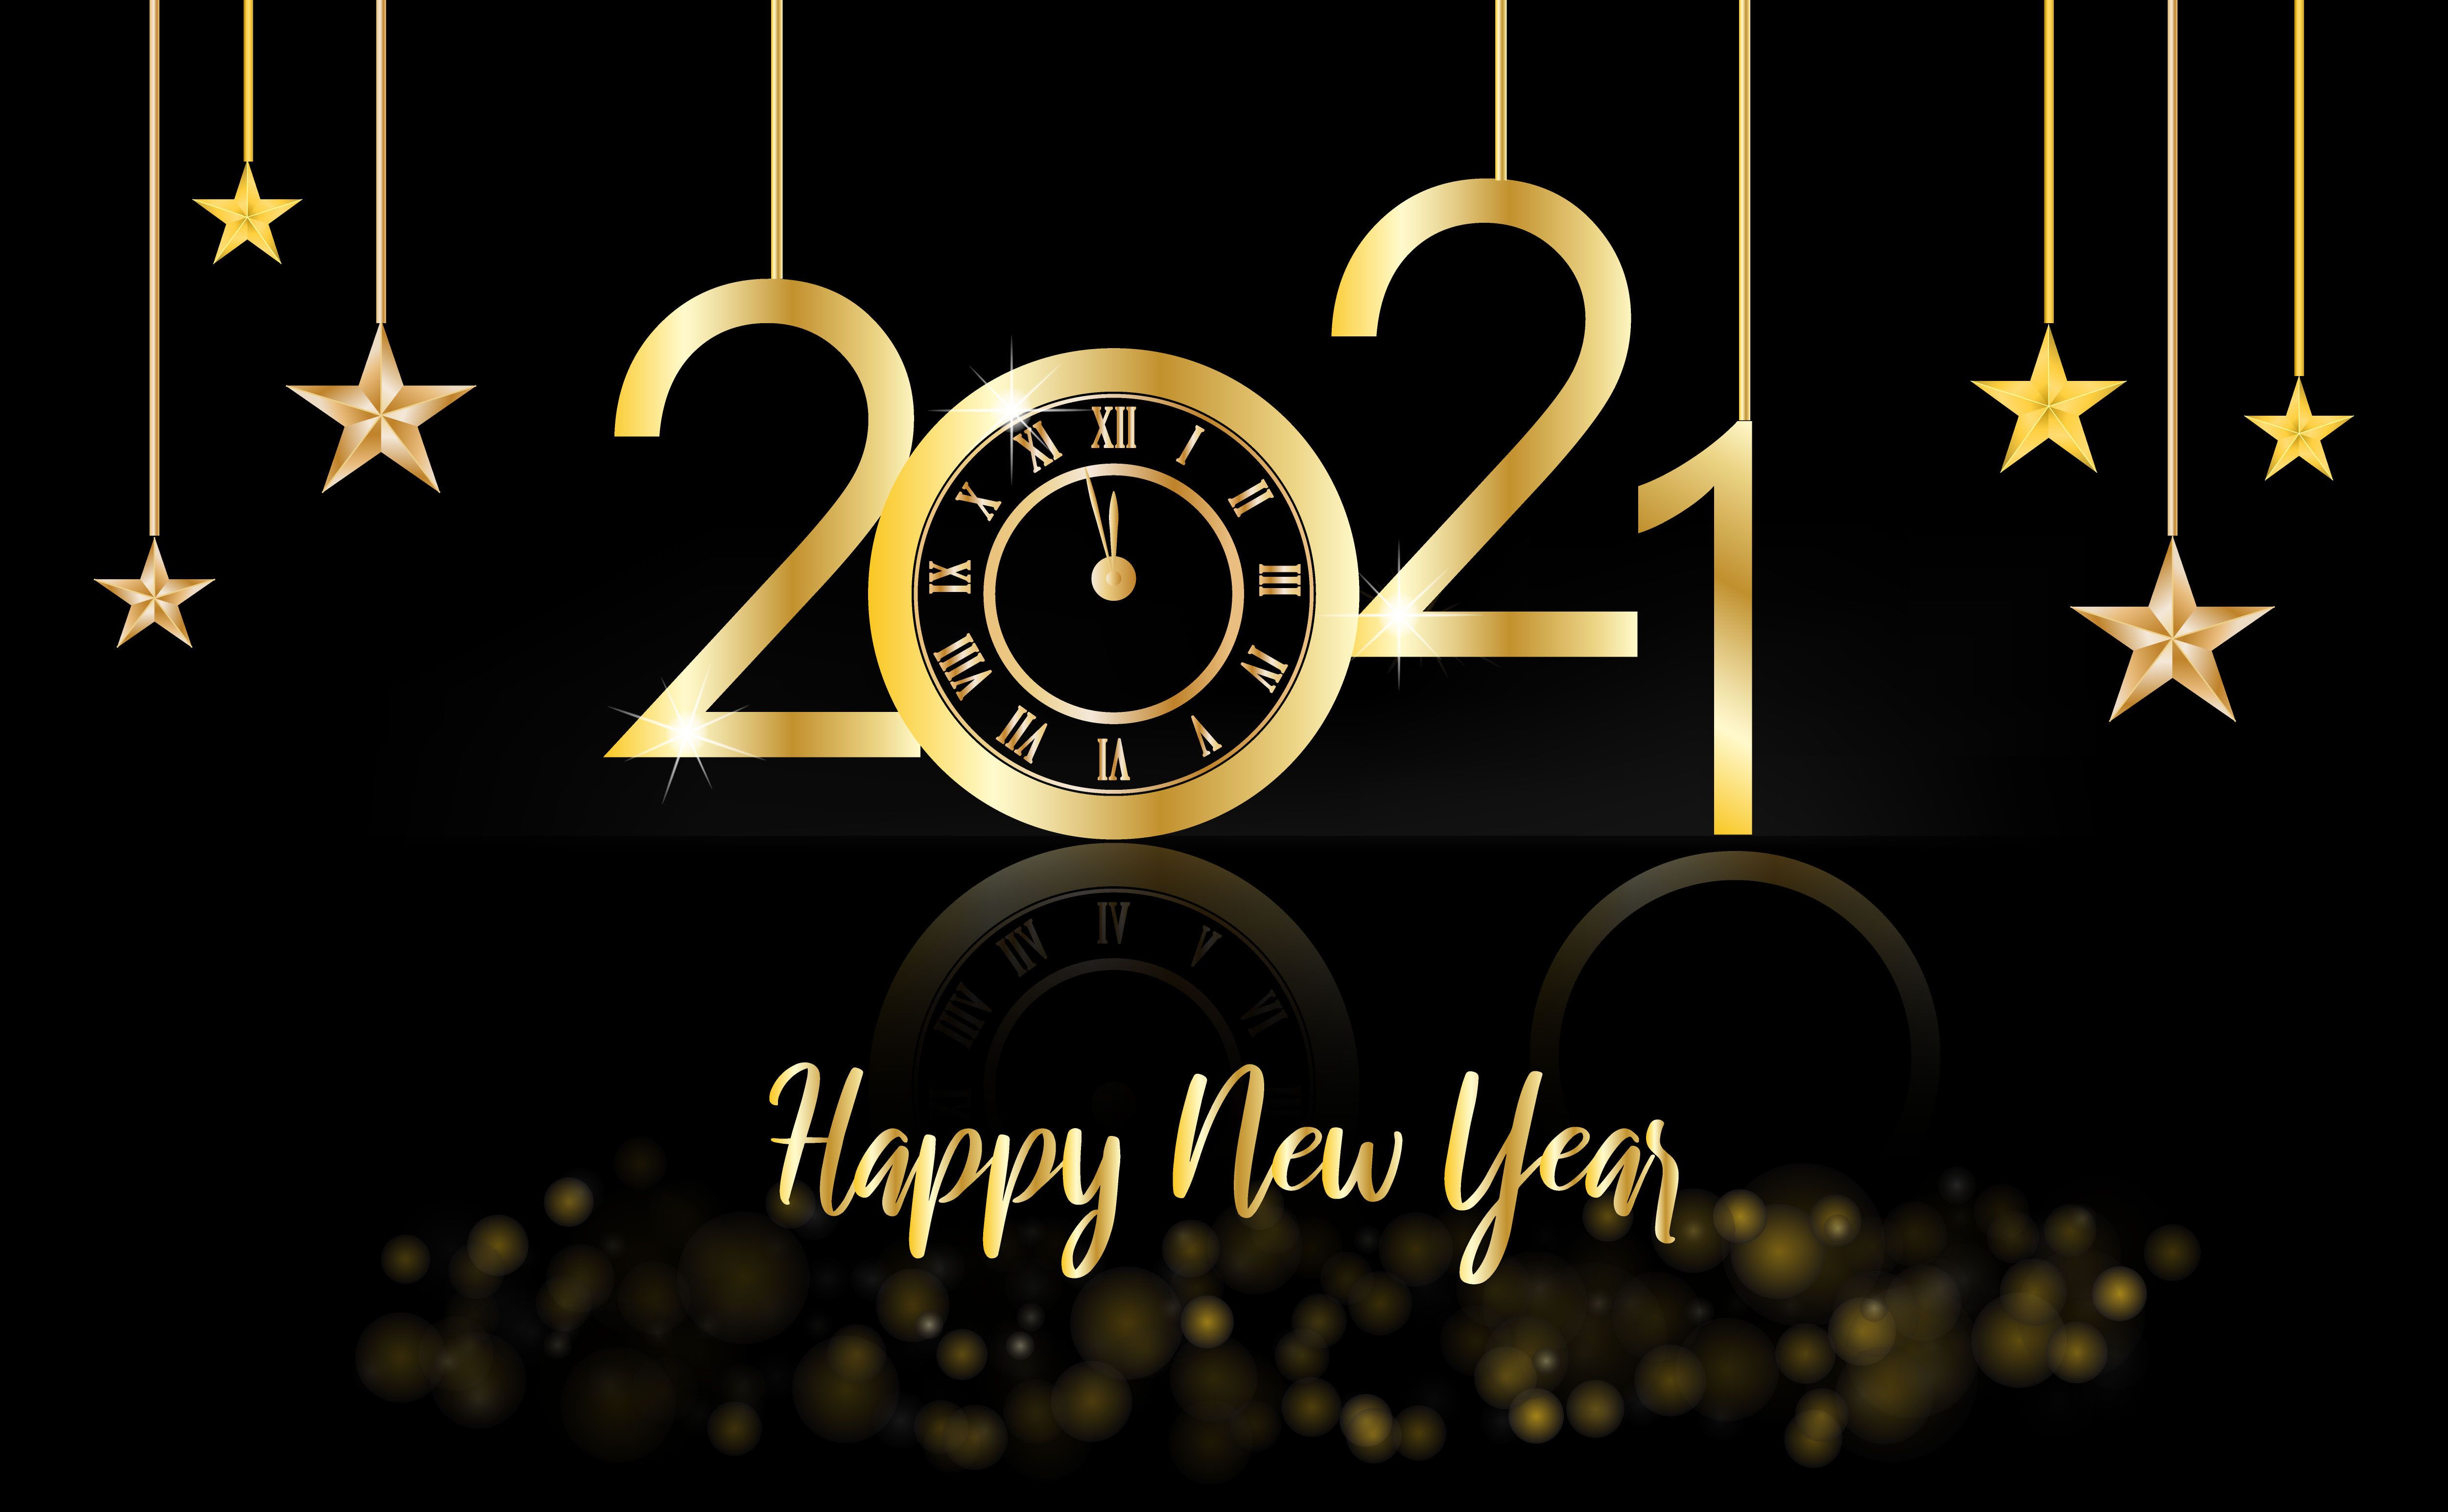 Happy New Year, 2021 gold and black background with a clock and stars Free Vectors, Clipart Graphics & Vector Art